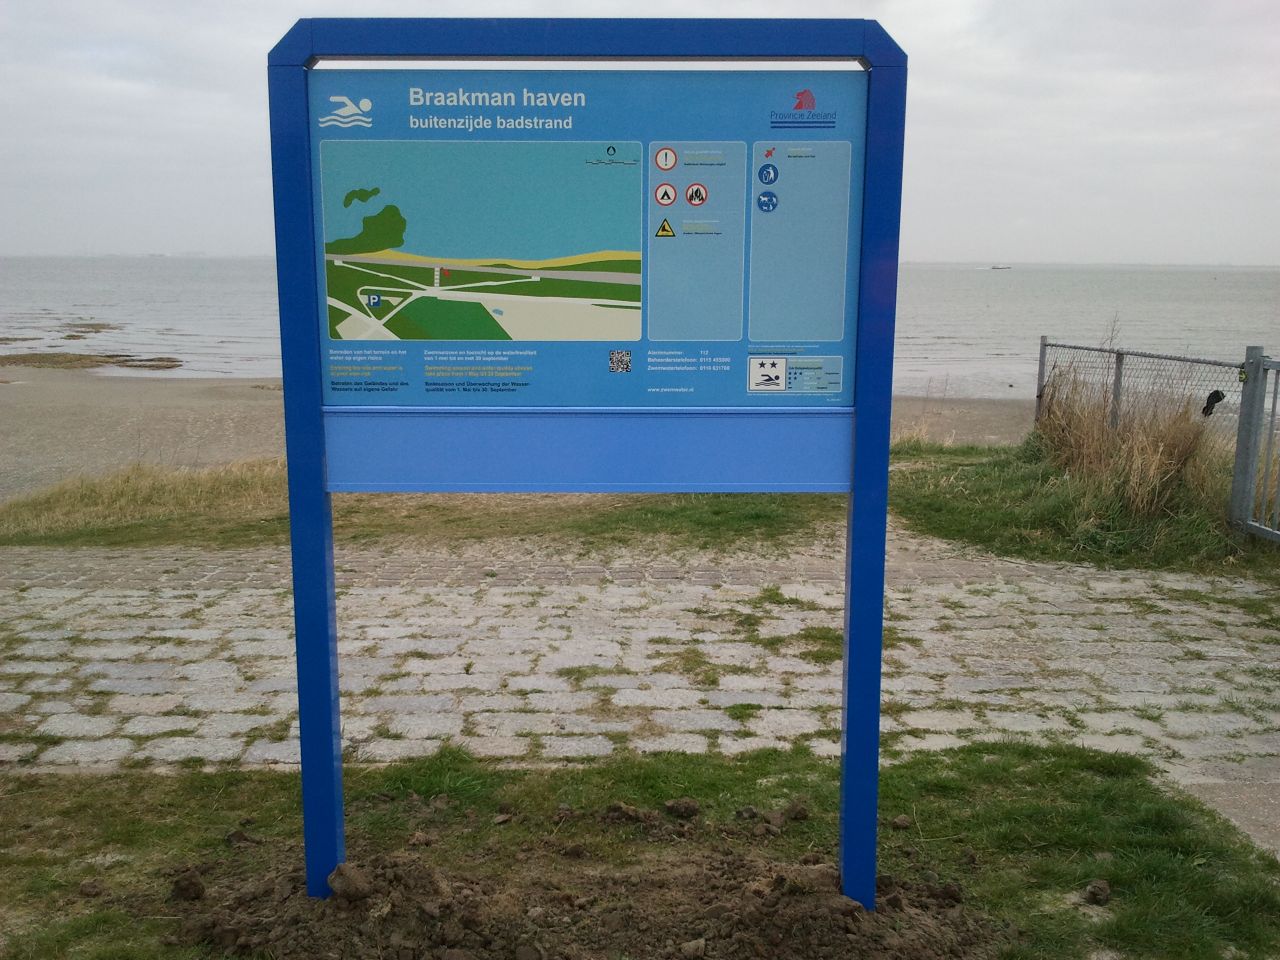 The information board at the swimming location Braakman Haven Buitenzijde Badstrand